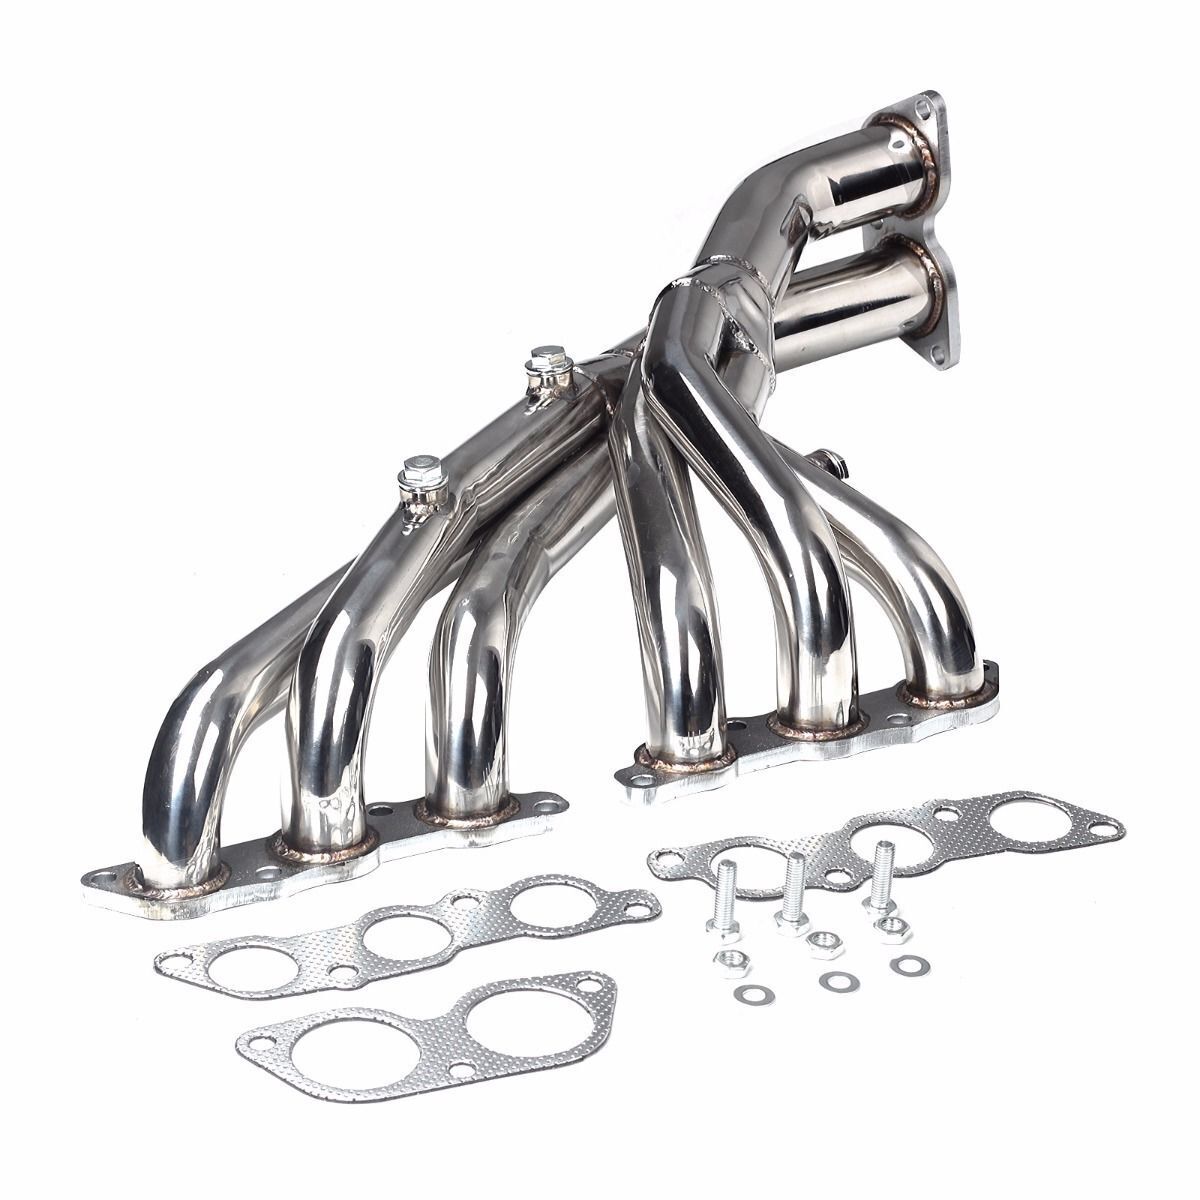 Manifold Exhaust Header FOR 01 - 05 Lexus IS300 3.0L 2JX-GE DOHC Us Stock